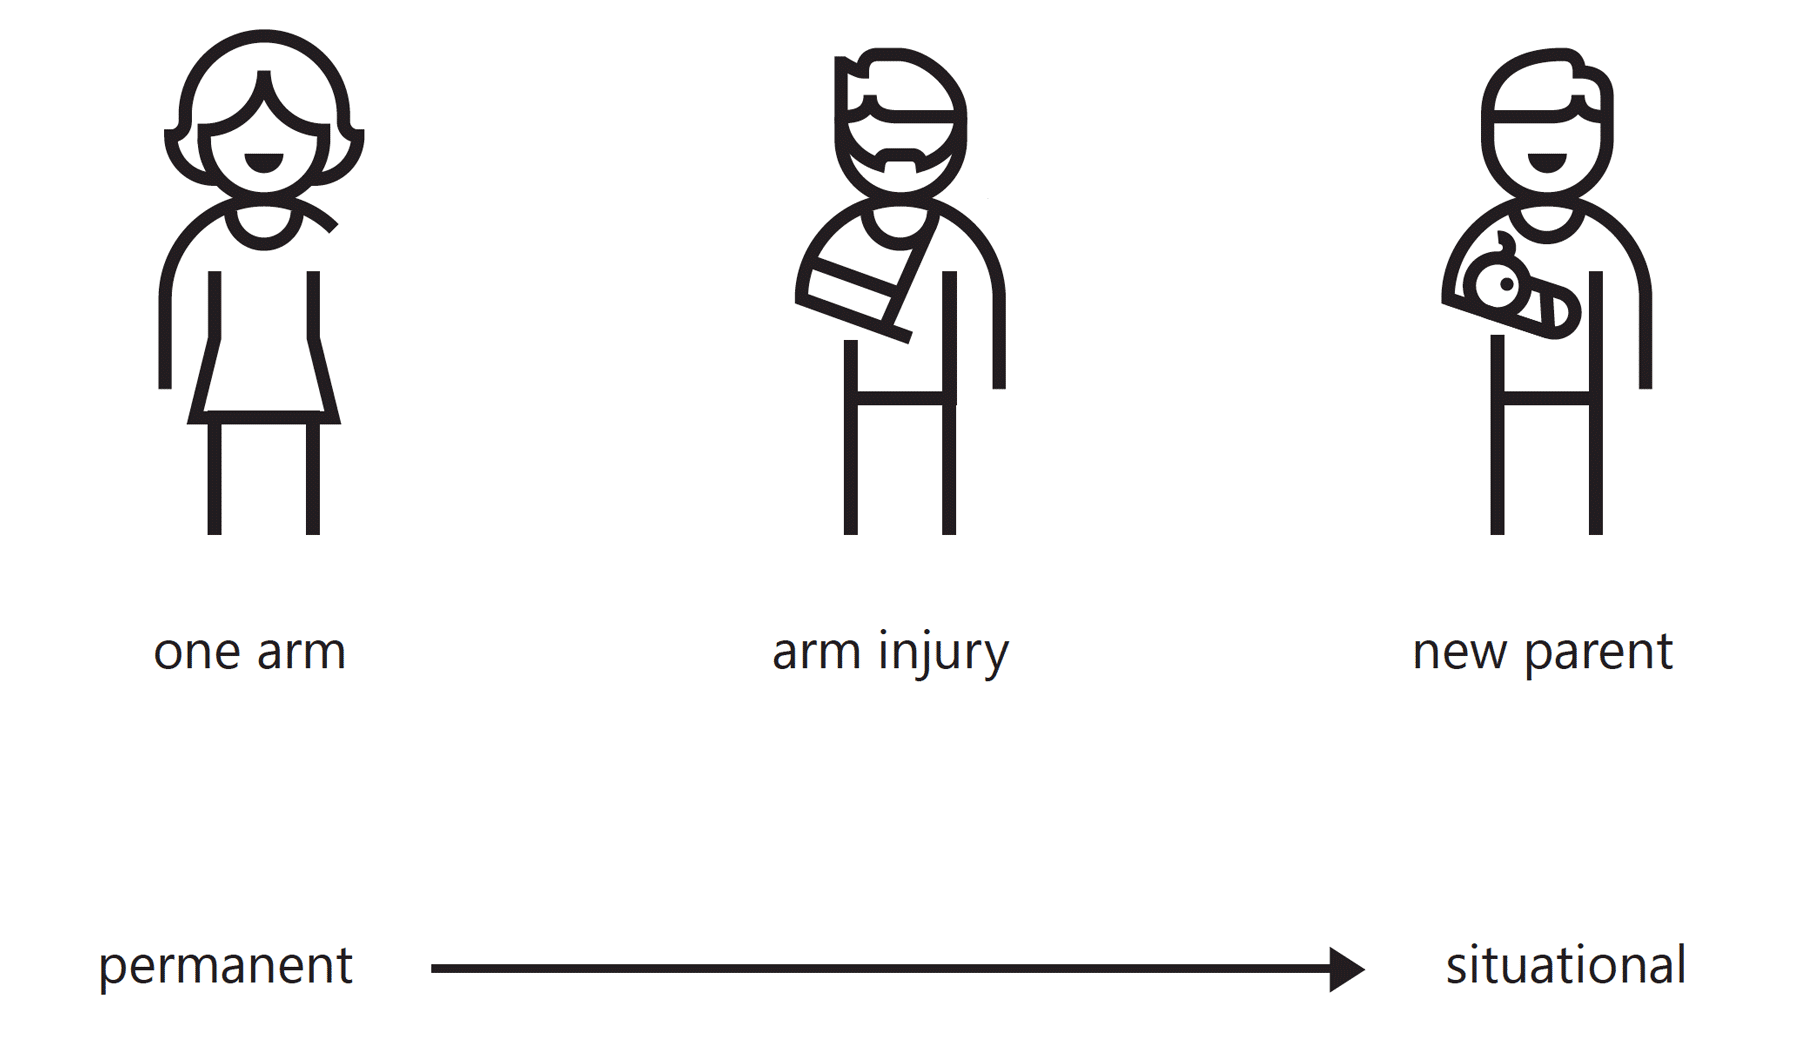 Permanent disability to injury or situational disability